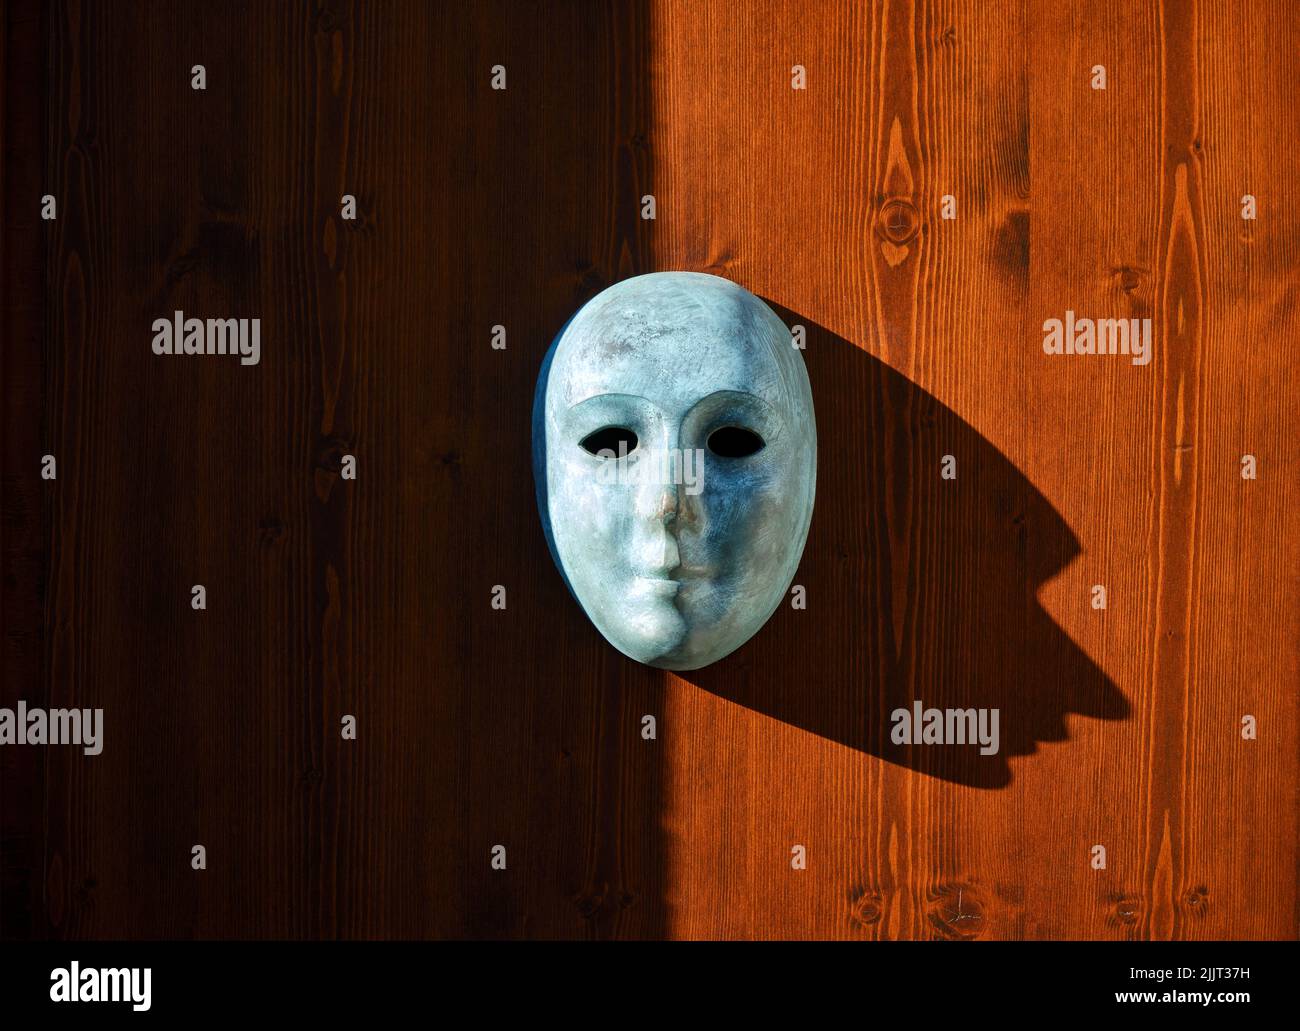 Venetian mask on wooden background with high contrast shadow, front view colorful picture Stock Photo